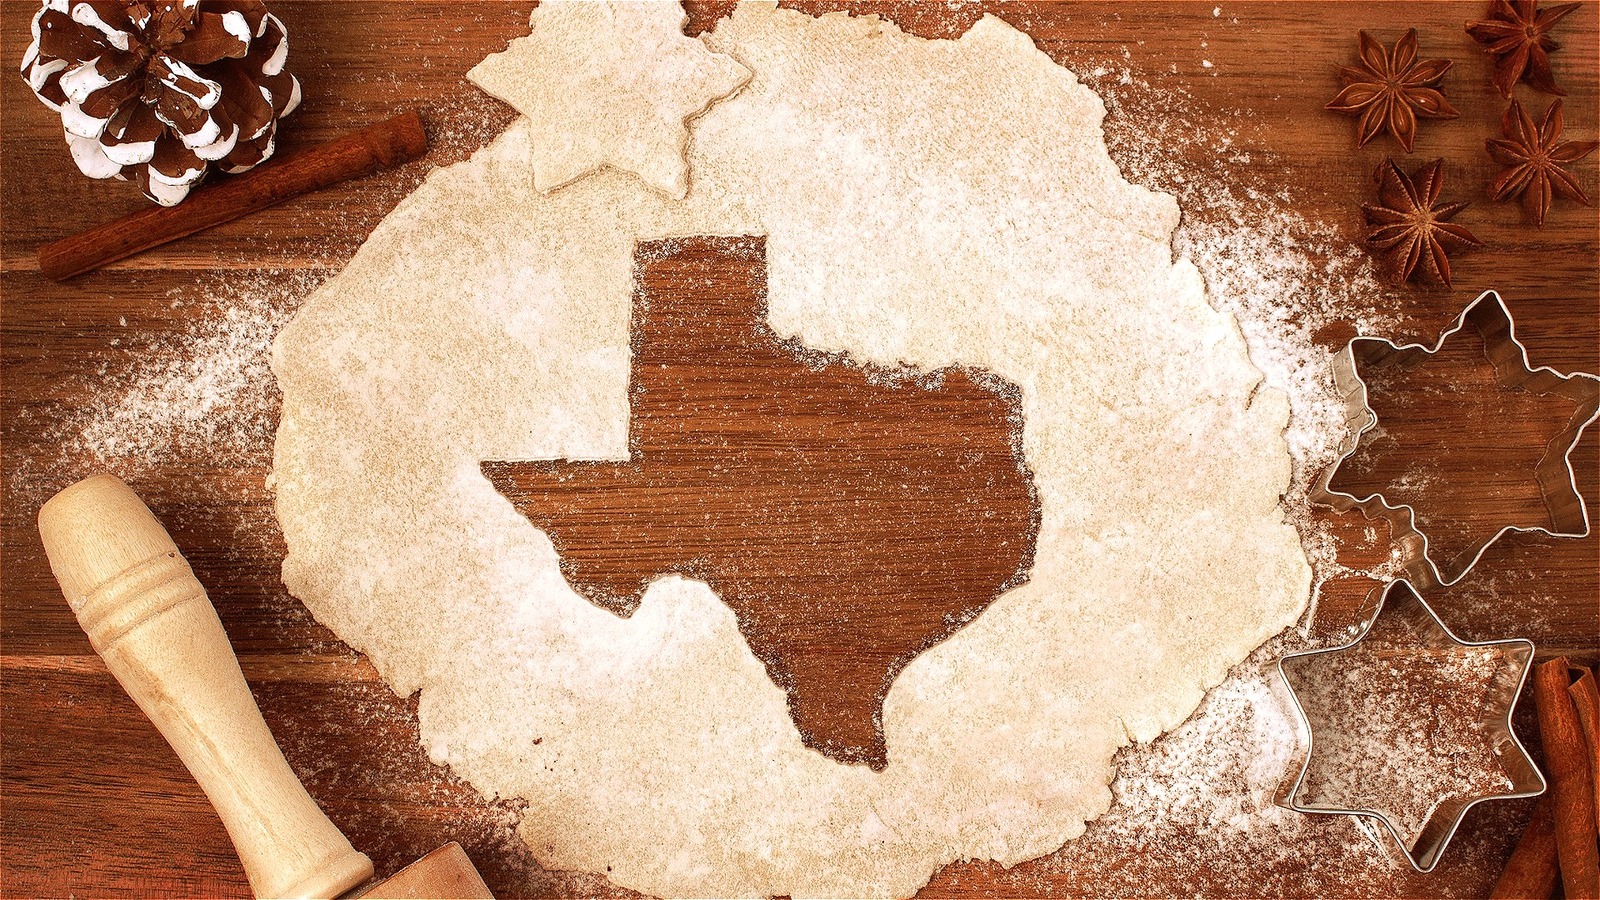 Texas State Cake Pan - Texas by Texans